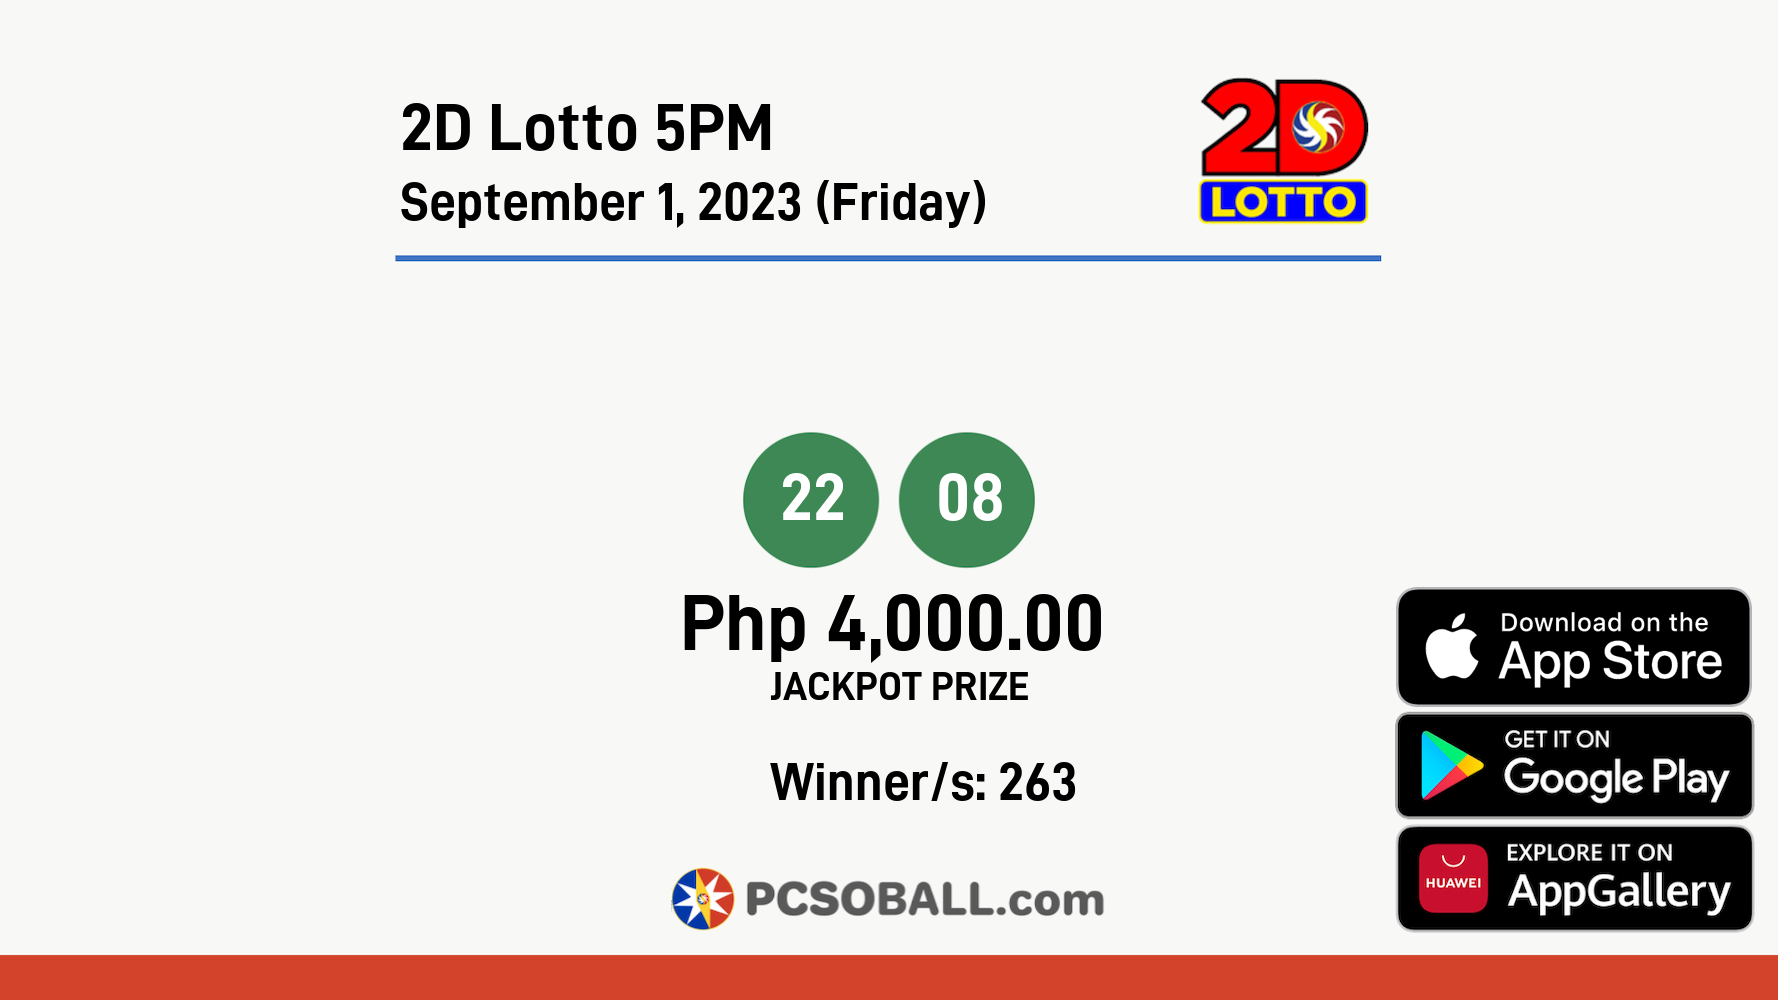 2D Lotto 5PM September 1, 2023 (Friday) Result